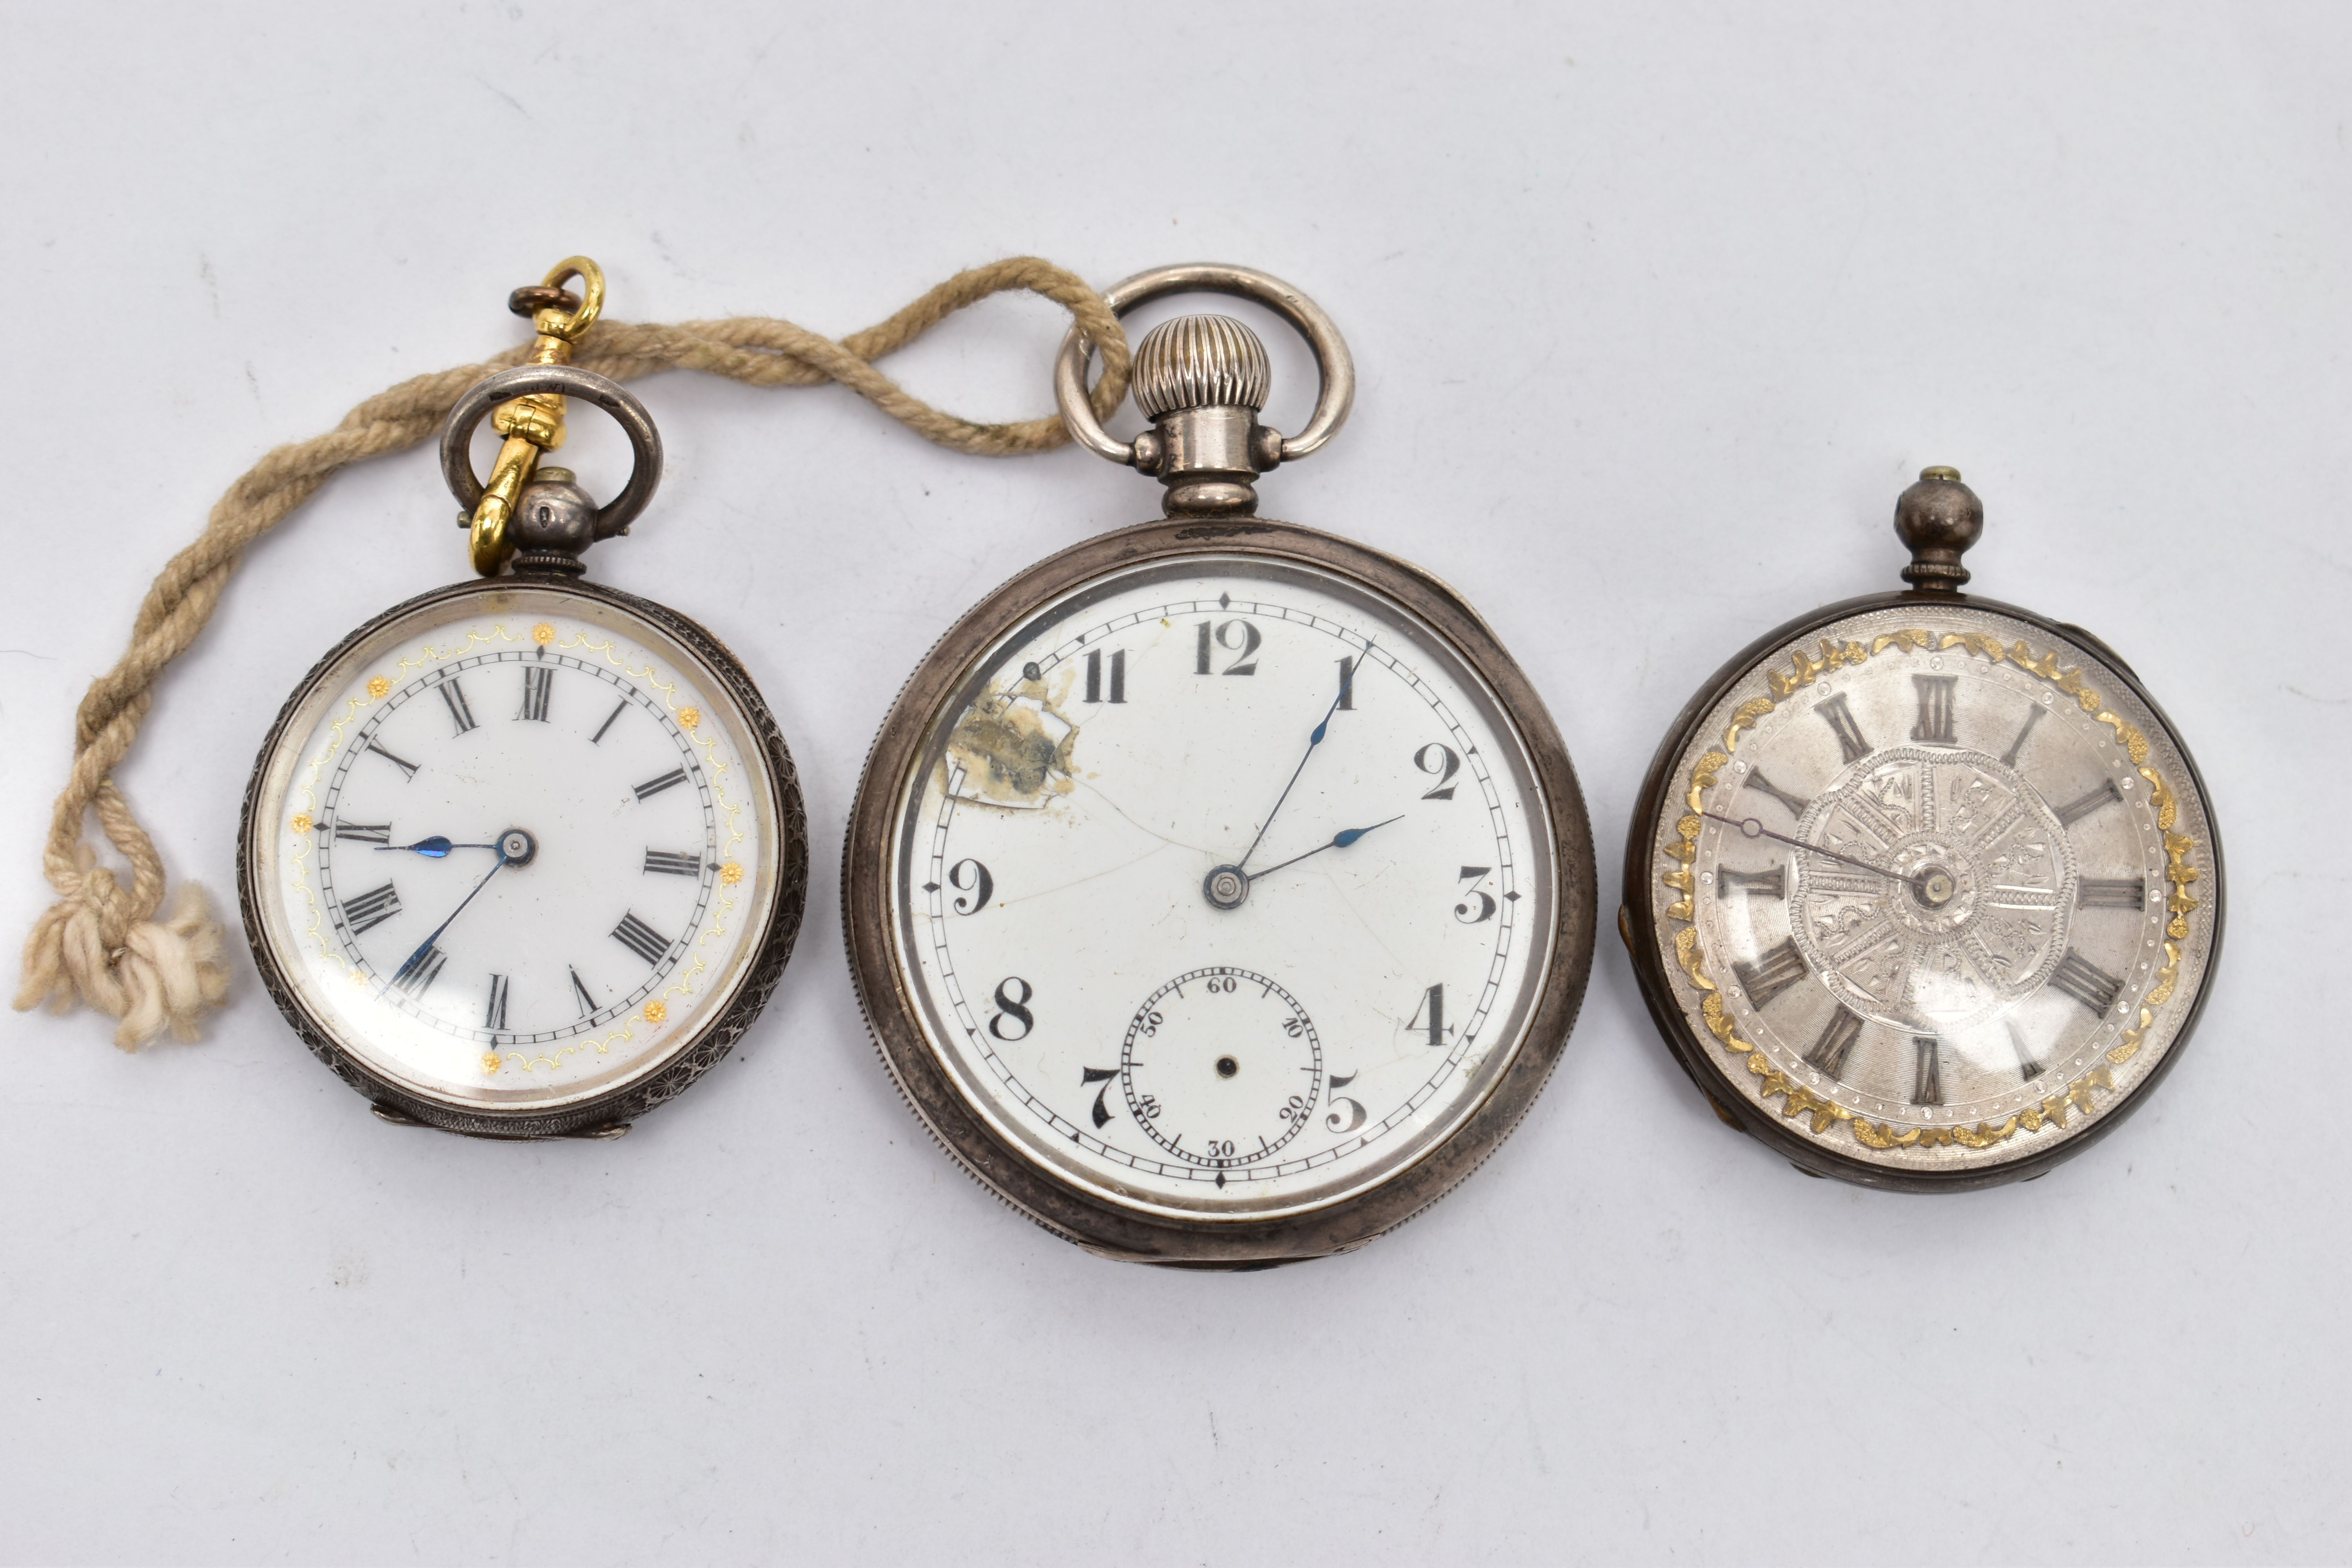 THREE OPEN FACE POCKET WATCHES, the first a silver cased pocket watch, hand wound movement, Arabic